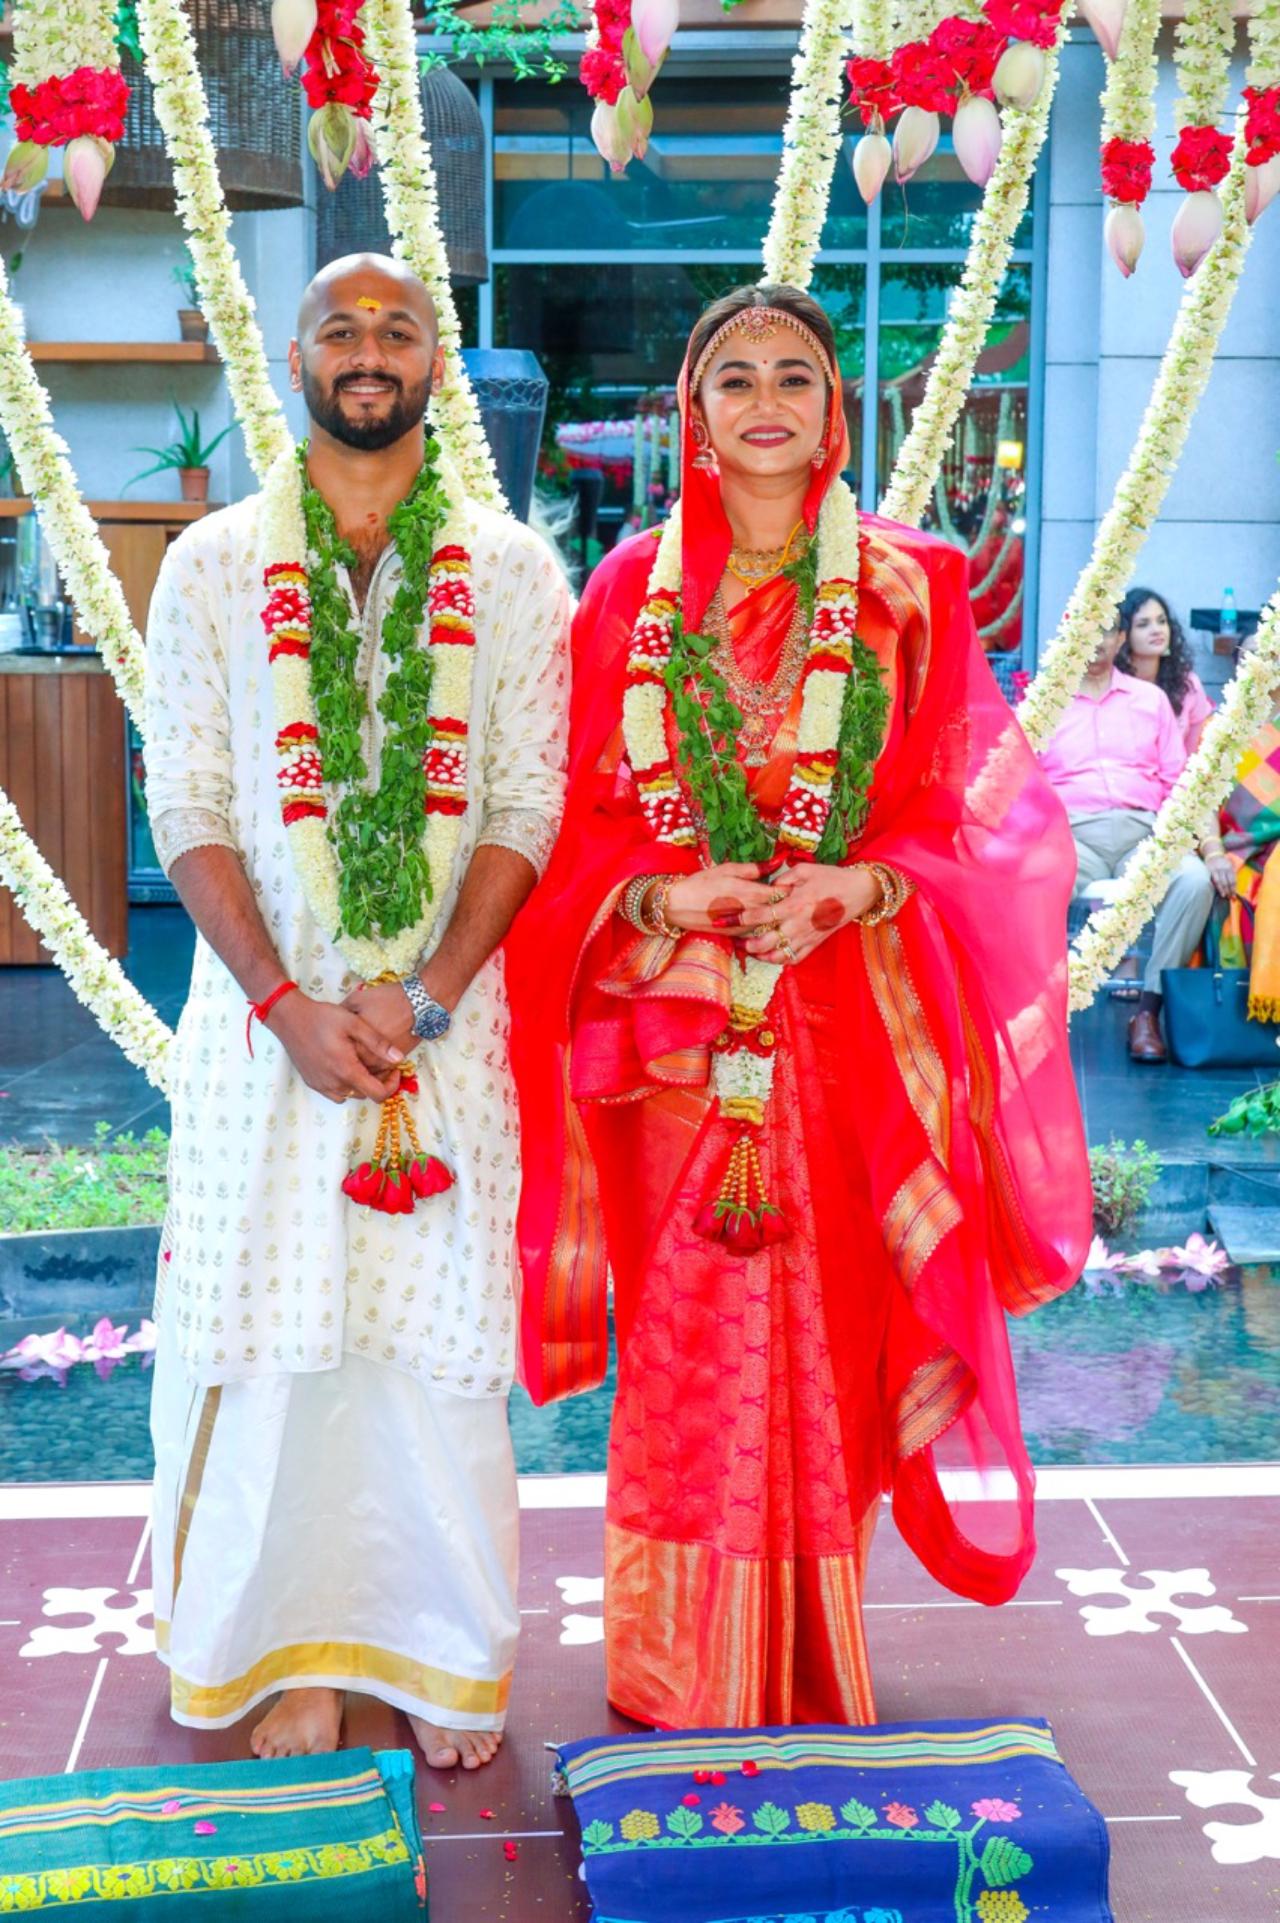 Santhana Krishnan opted for a white outfit whereas Manini Sharma wore a printed red saree with golden border 